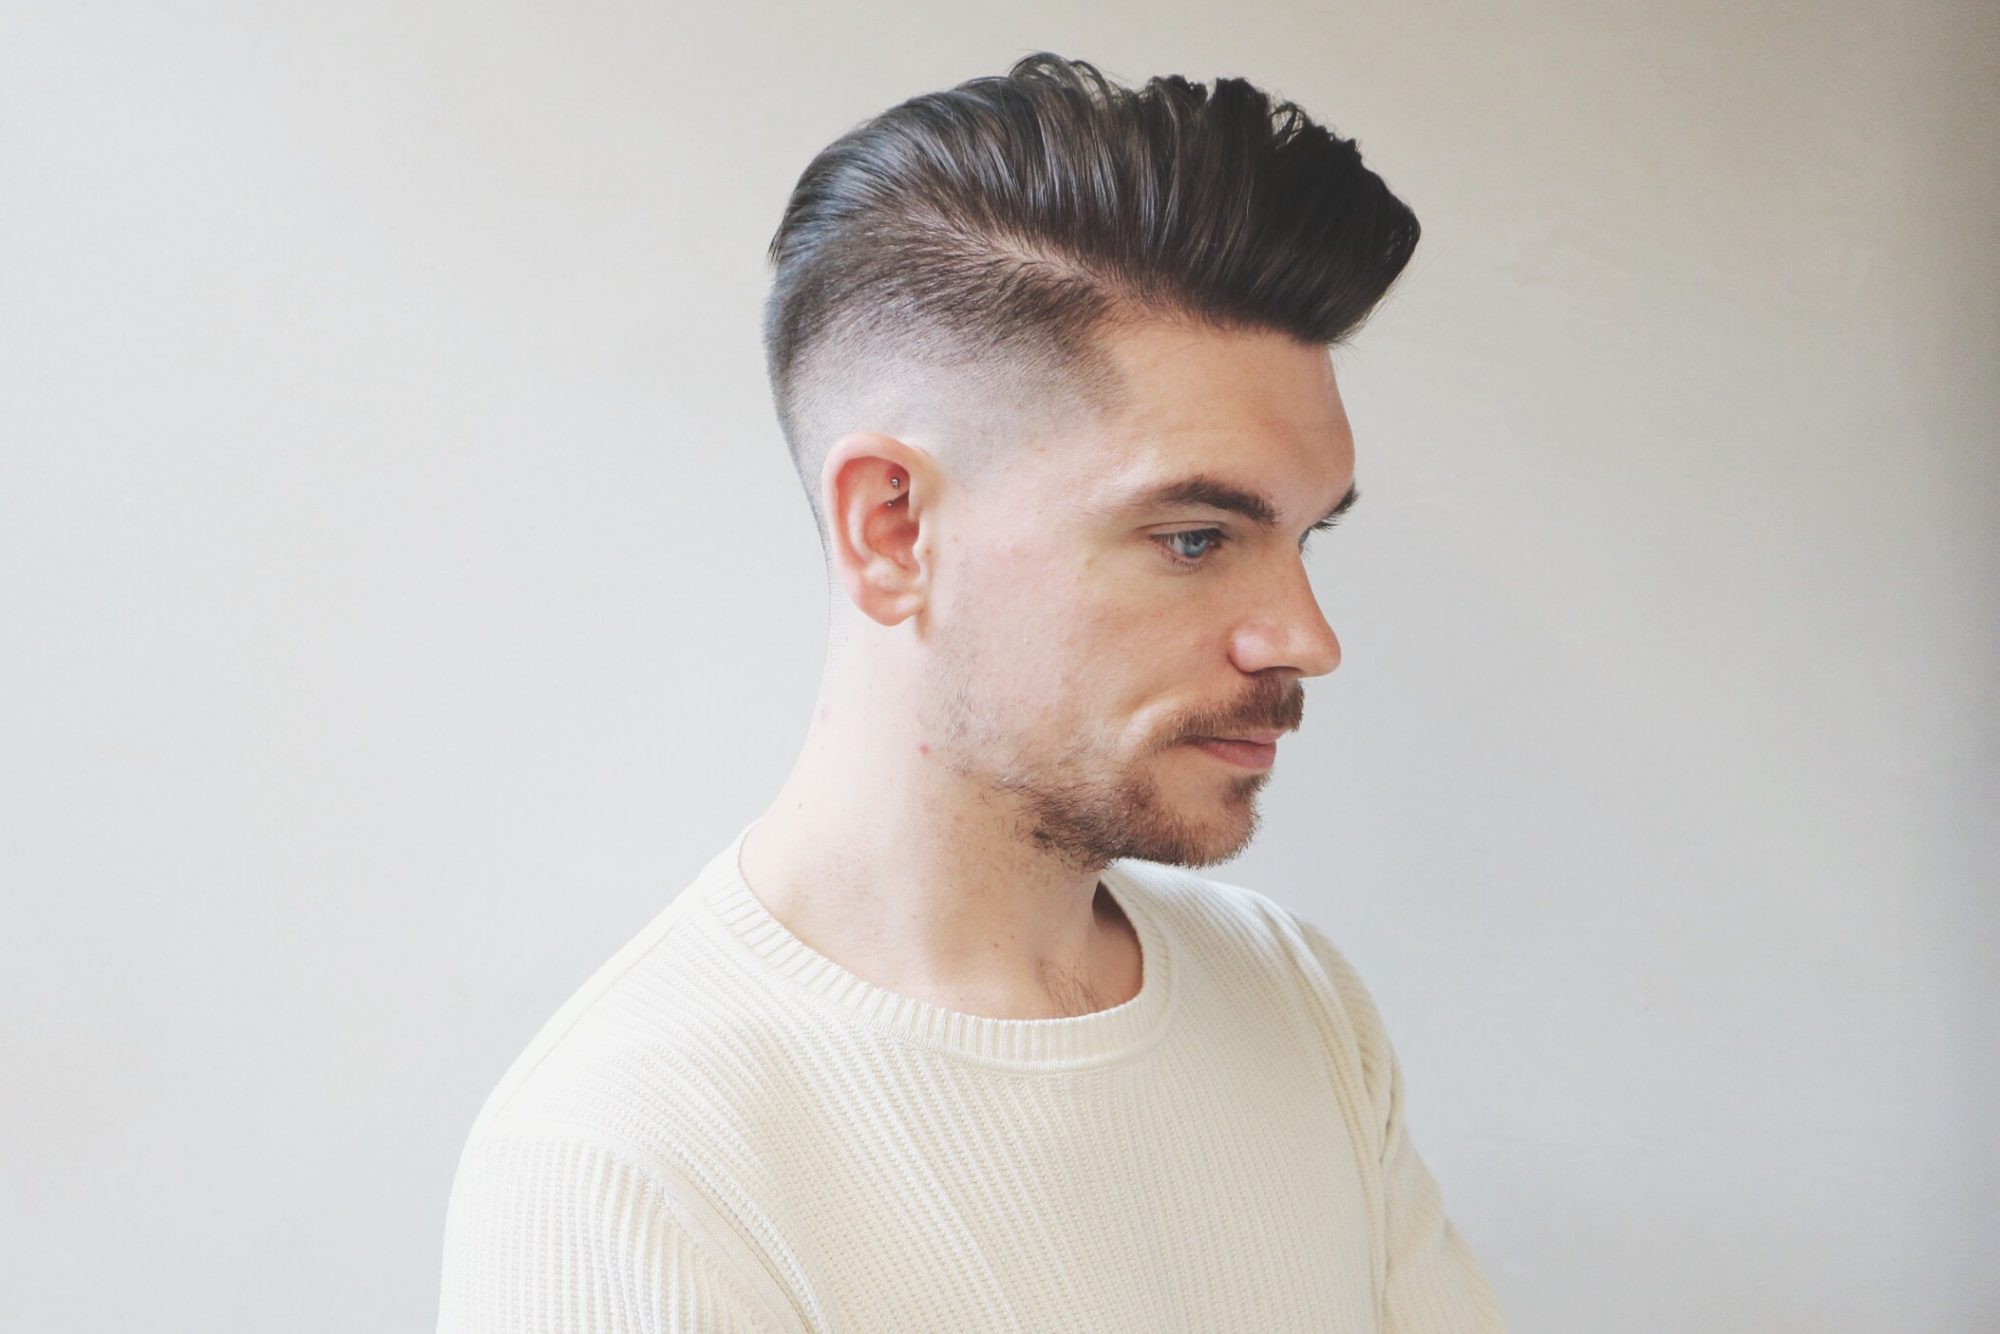 skin-fade-haircut-side-pomp-hairstyle-how-to